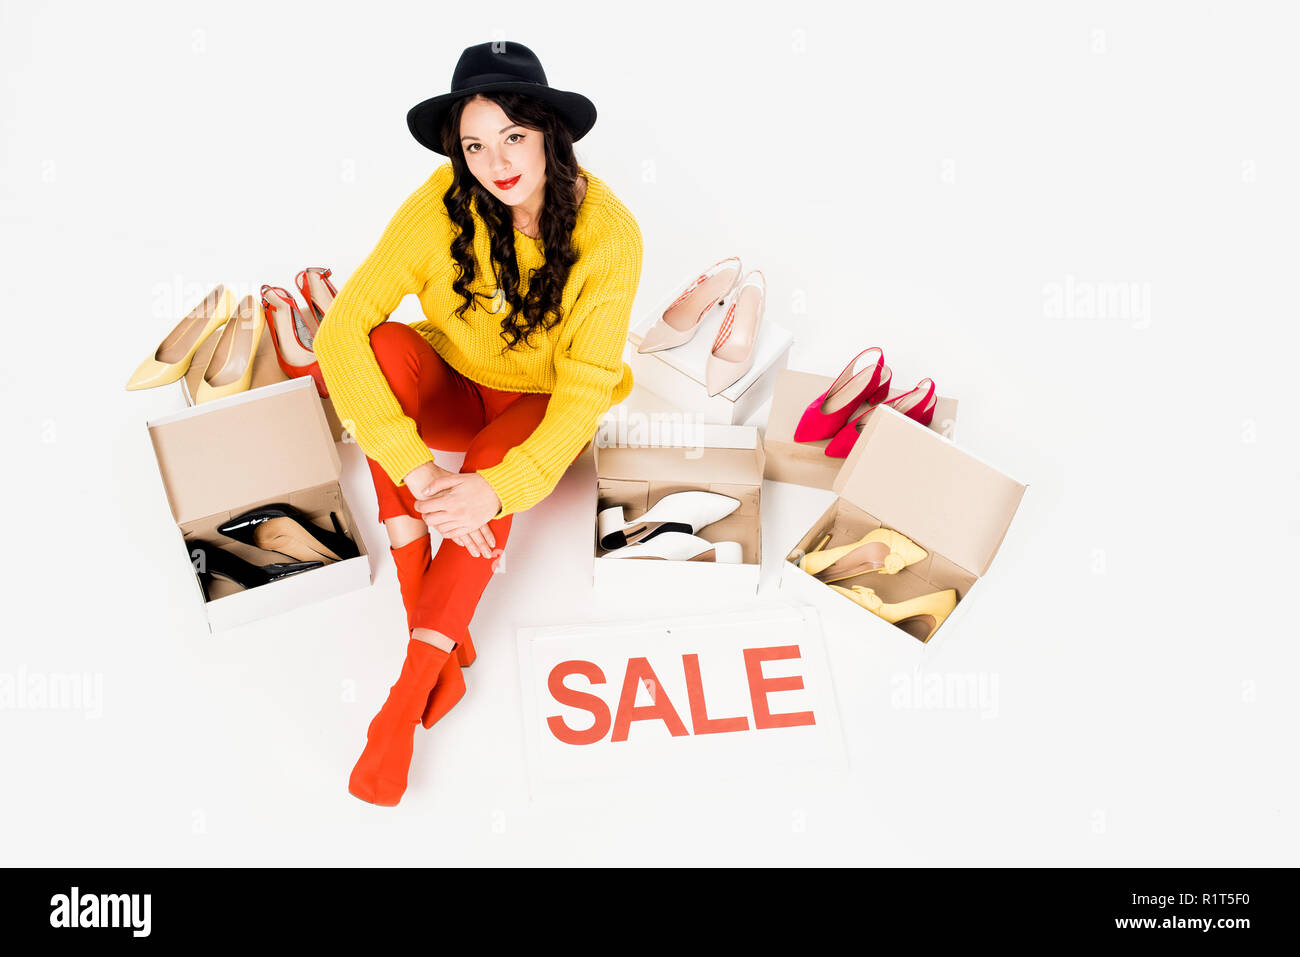 beautiful shopaholic with sale symbol isolated on white with footwear Stock Photo